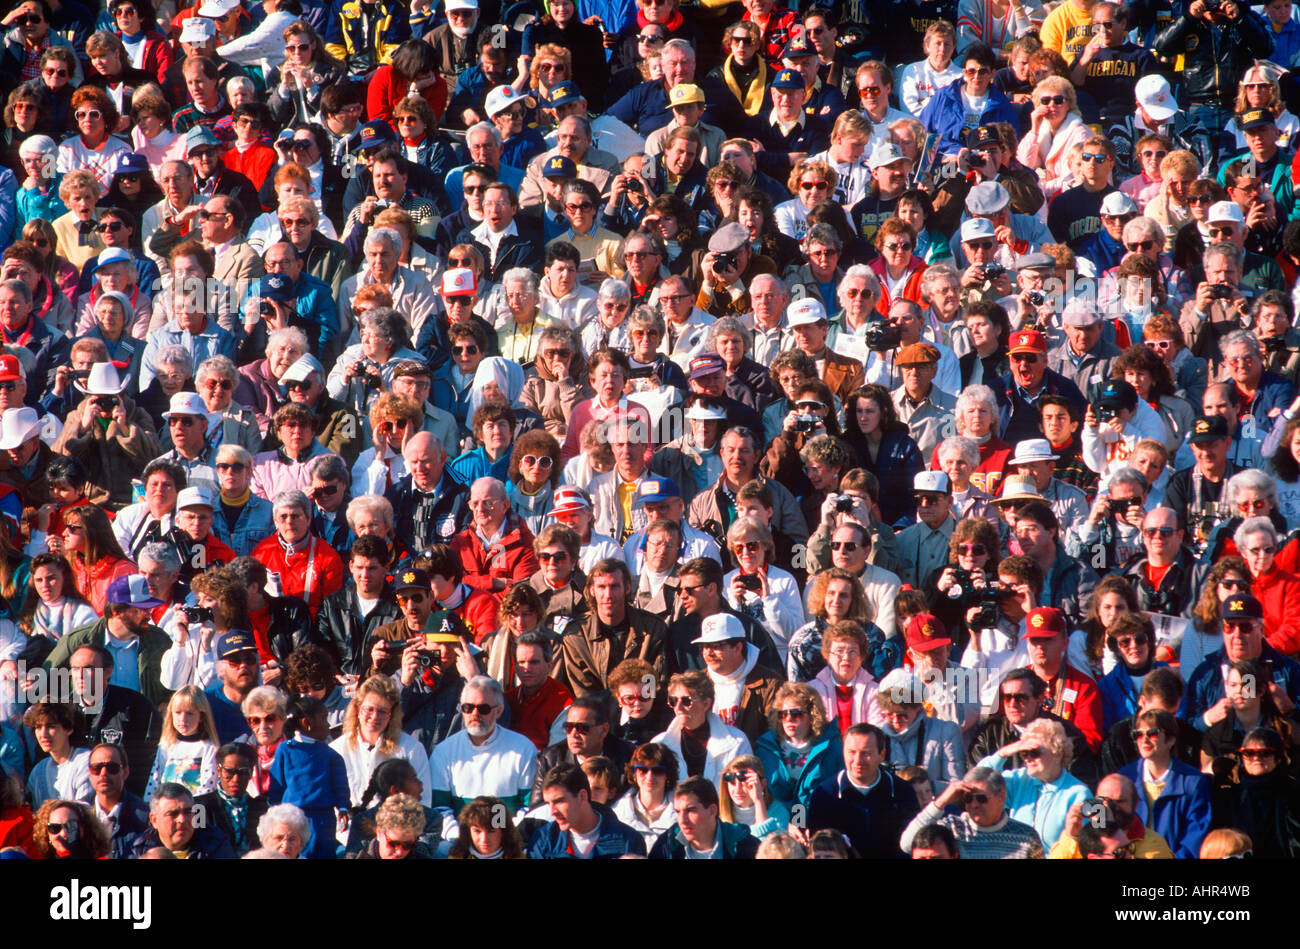 Large crowd of people Stock Photo